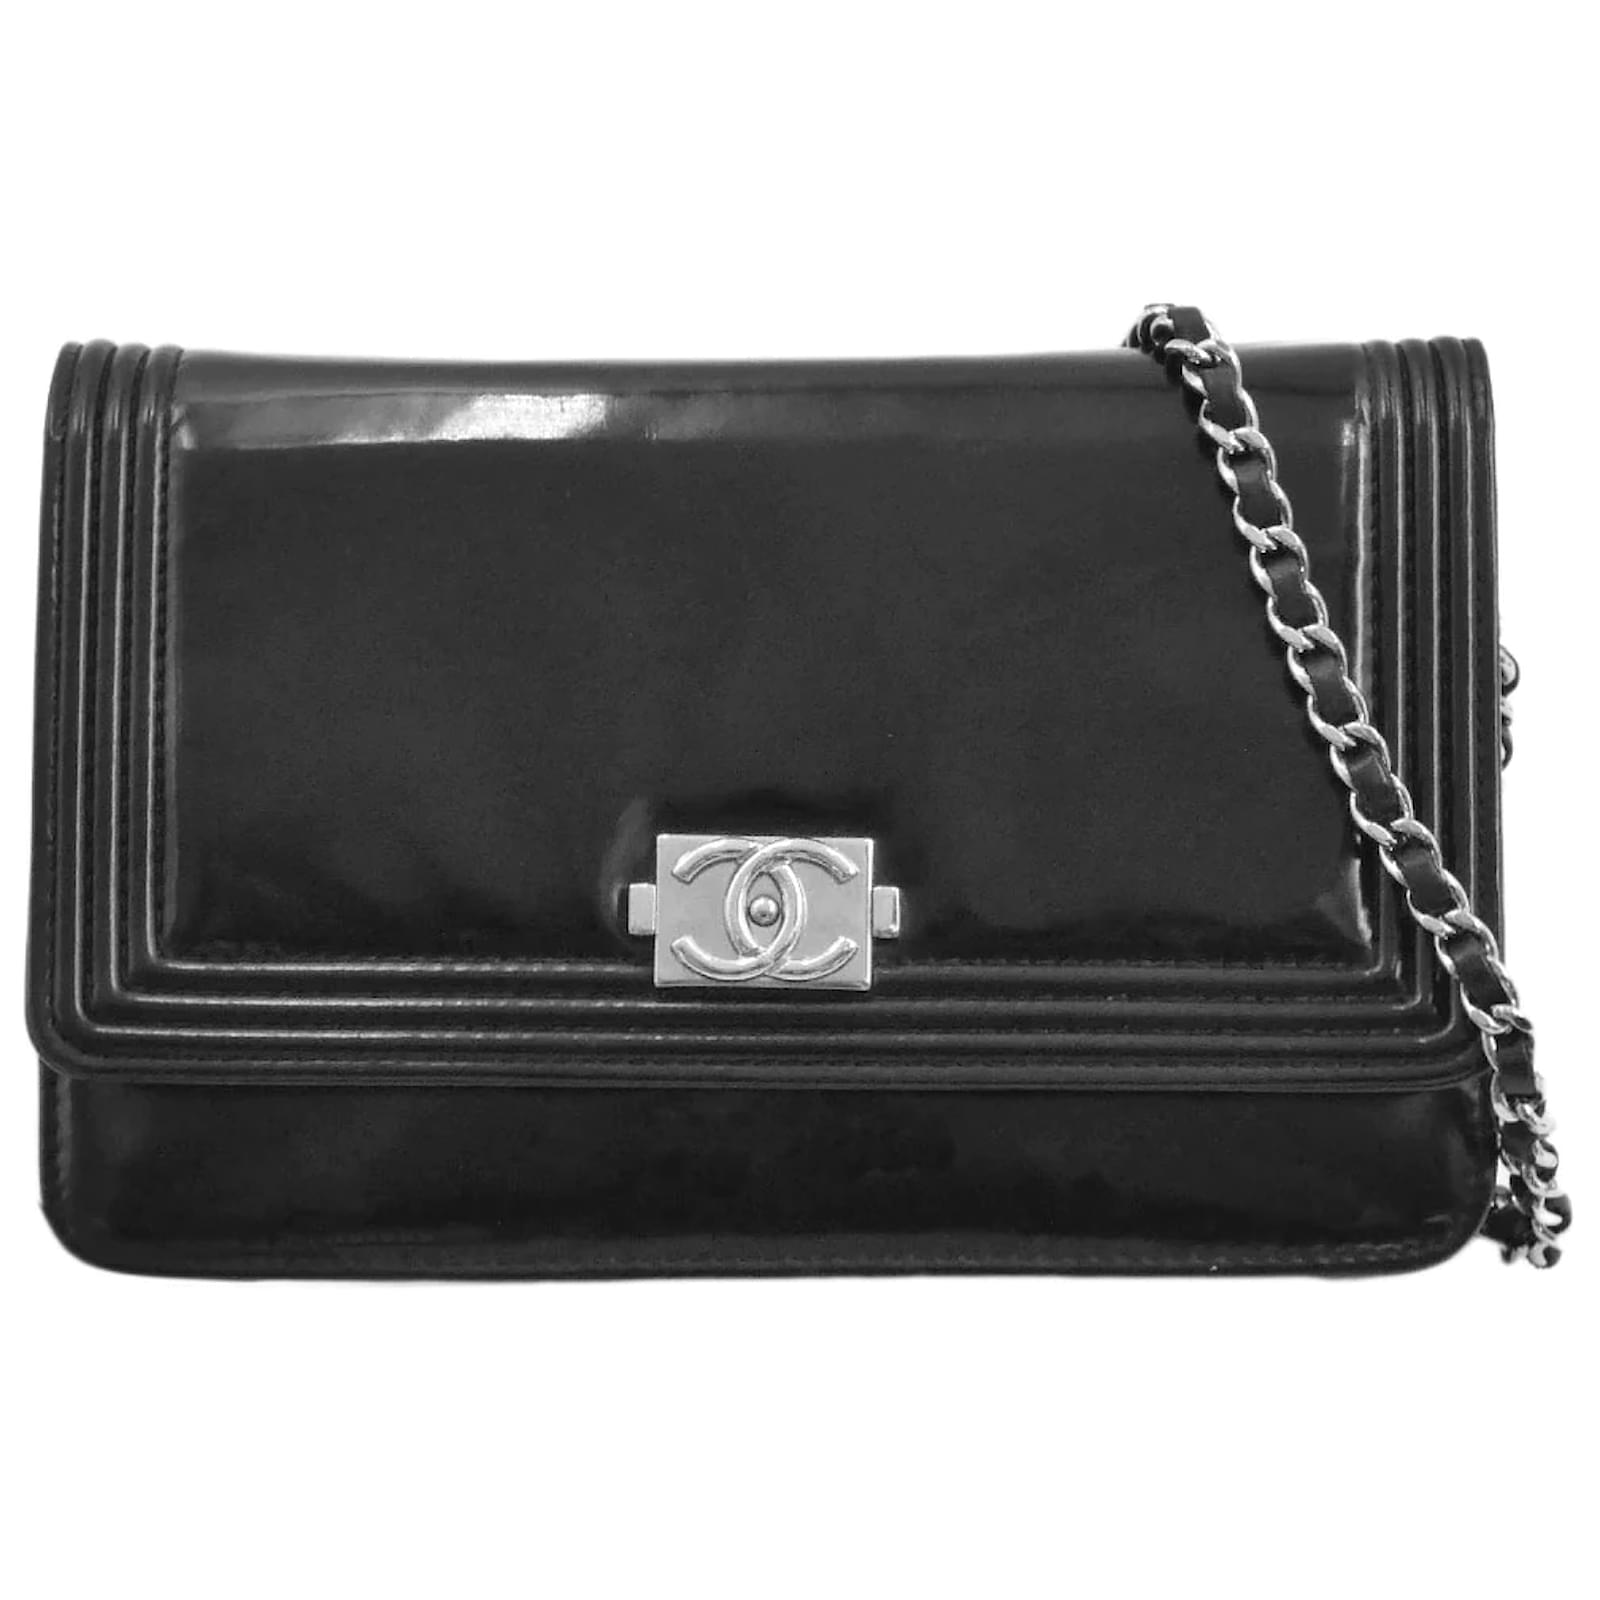 Chanel Black Quilted Glazed Leather Large Boy Flap Bag Chanel